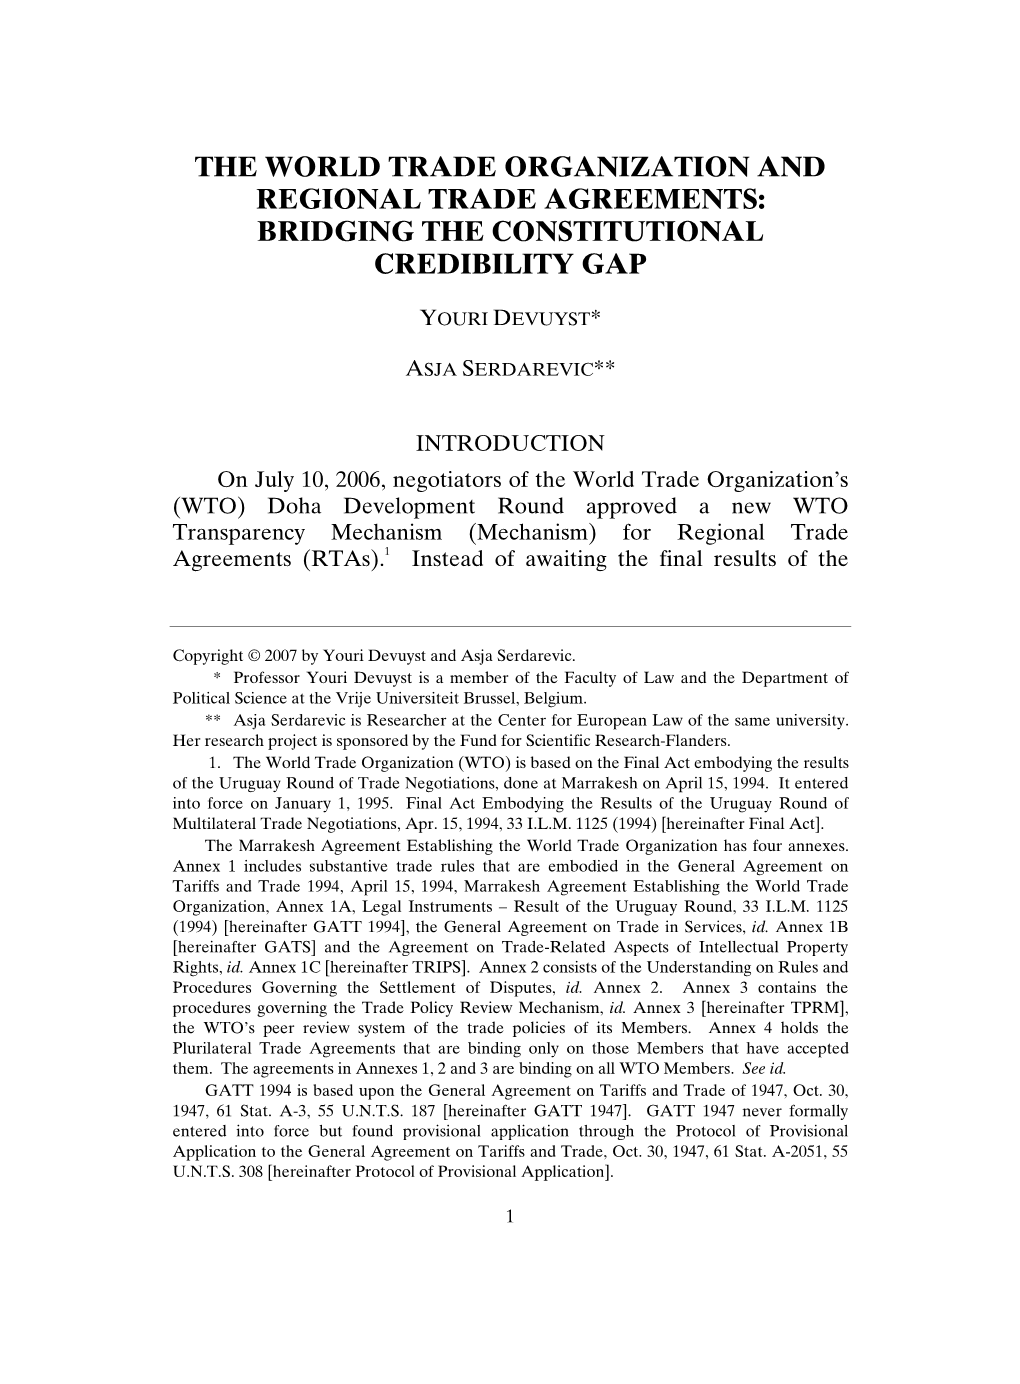 The World Trade Organization and Regional Trade Agreements: Bridging the Constitutional Credibility Gap